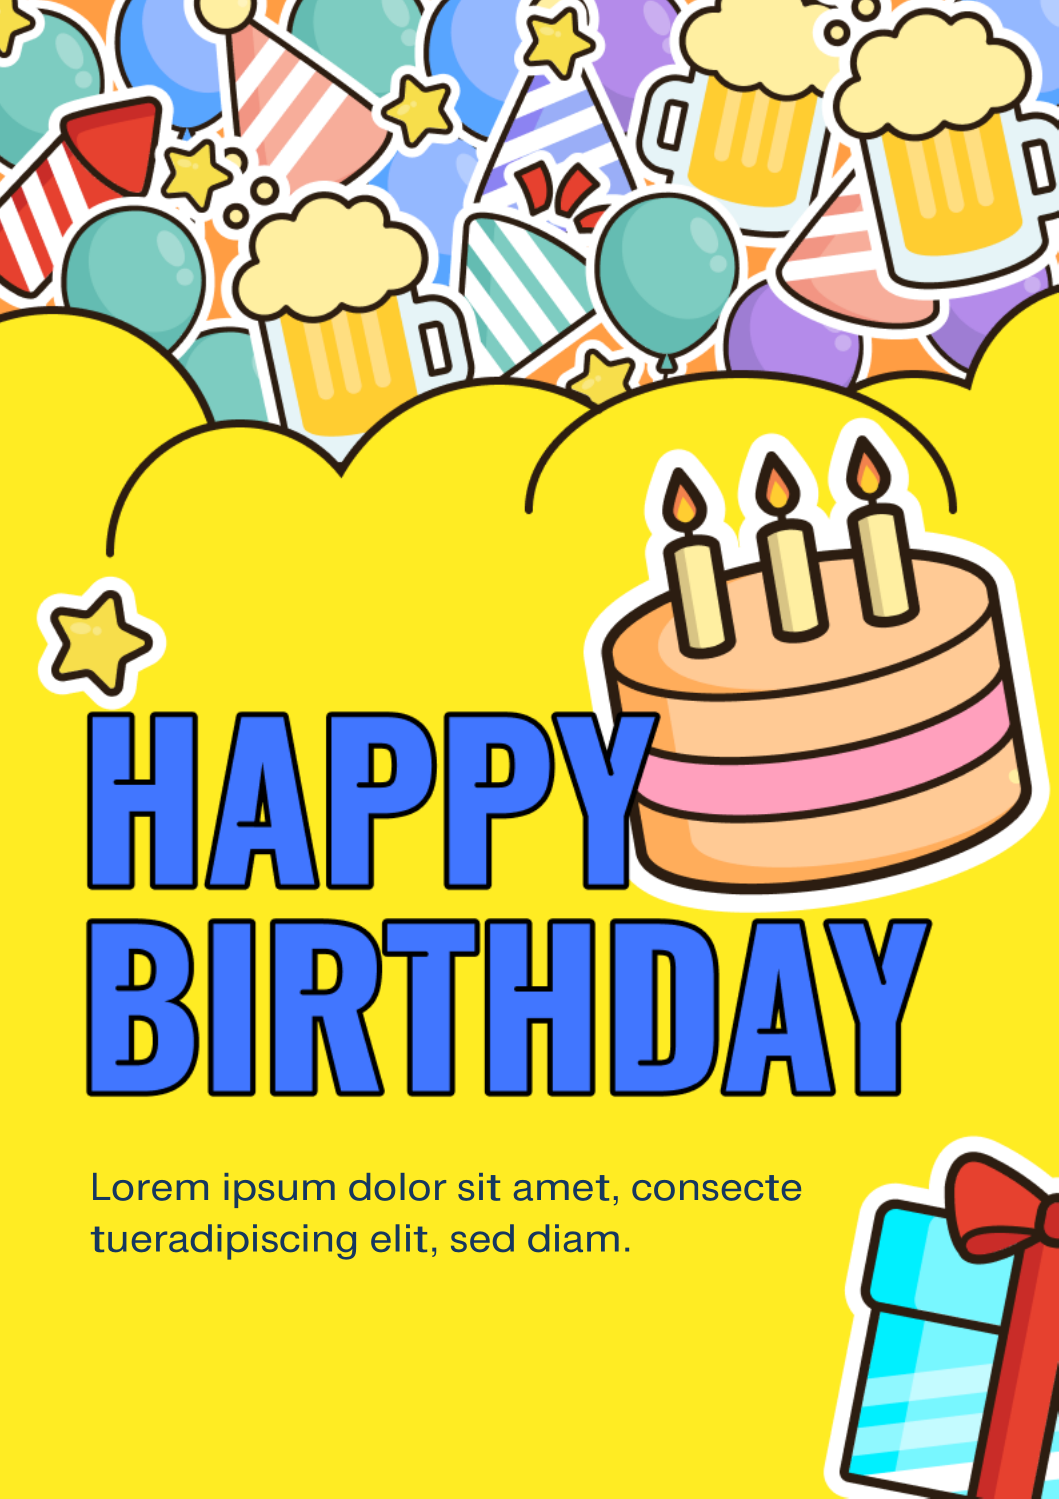 Birthday wishes for son card template